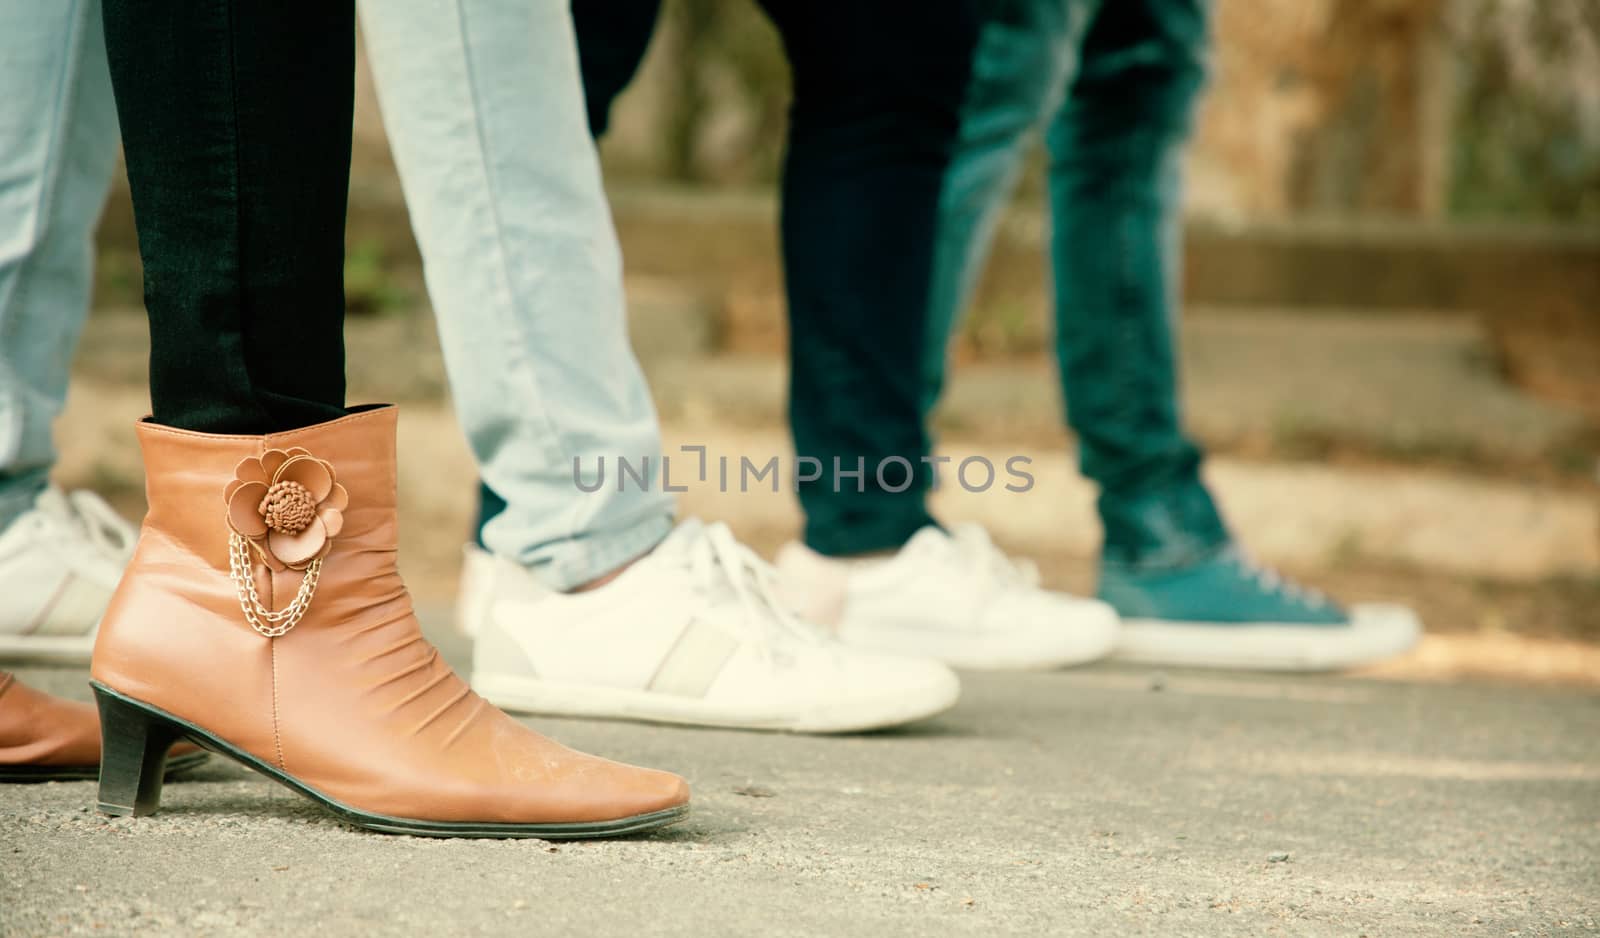 Close up of legs, Group of friends hanging out together - friendship, travel, tourism, summer vacation and people concept - closeup of trendy fashioned millennials walking in city